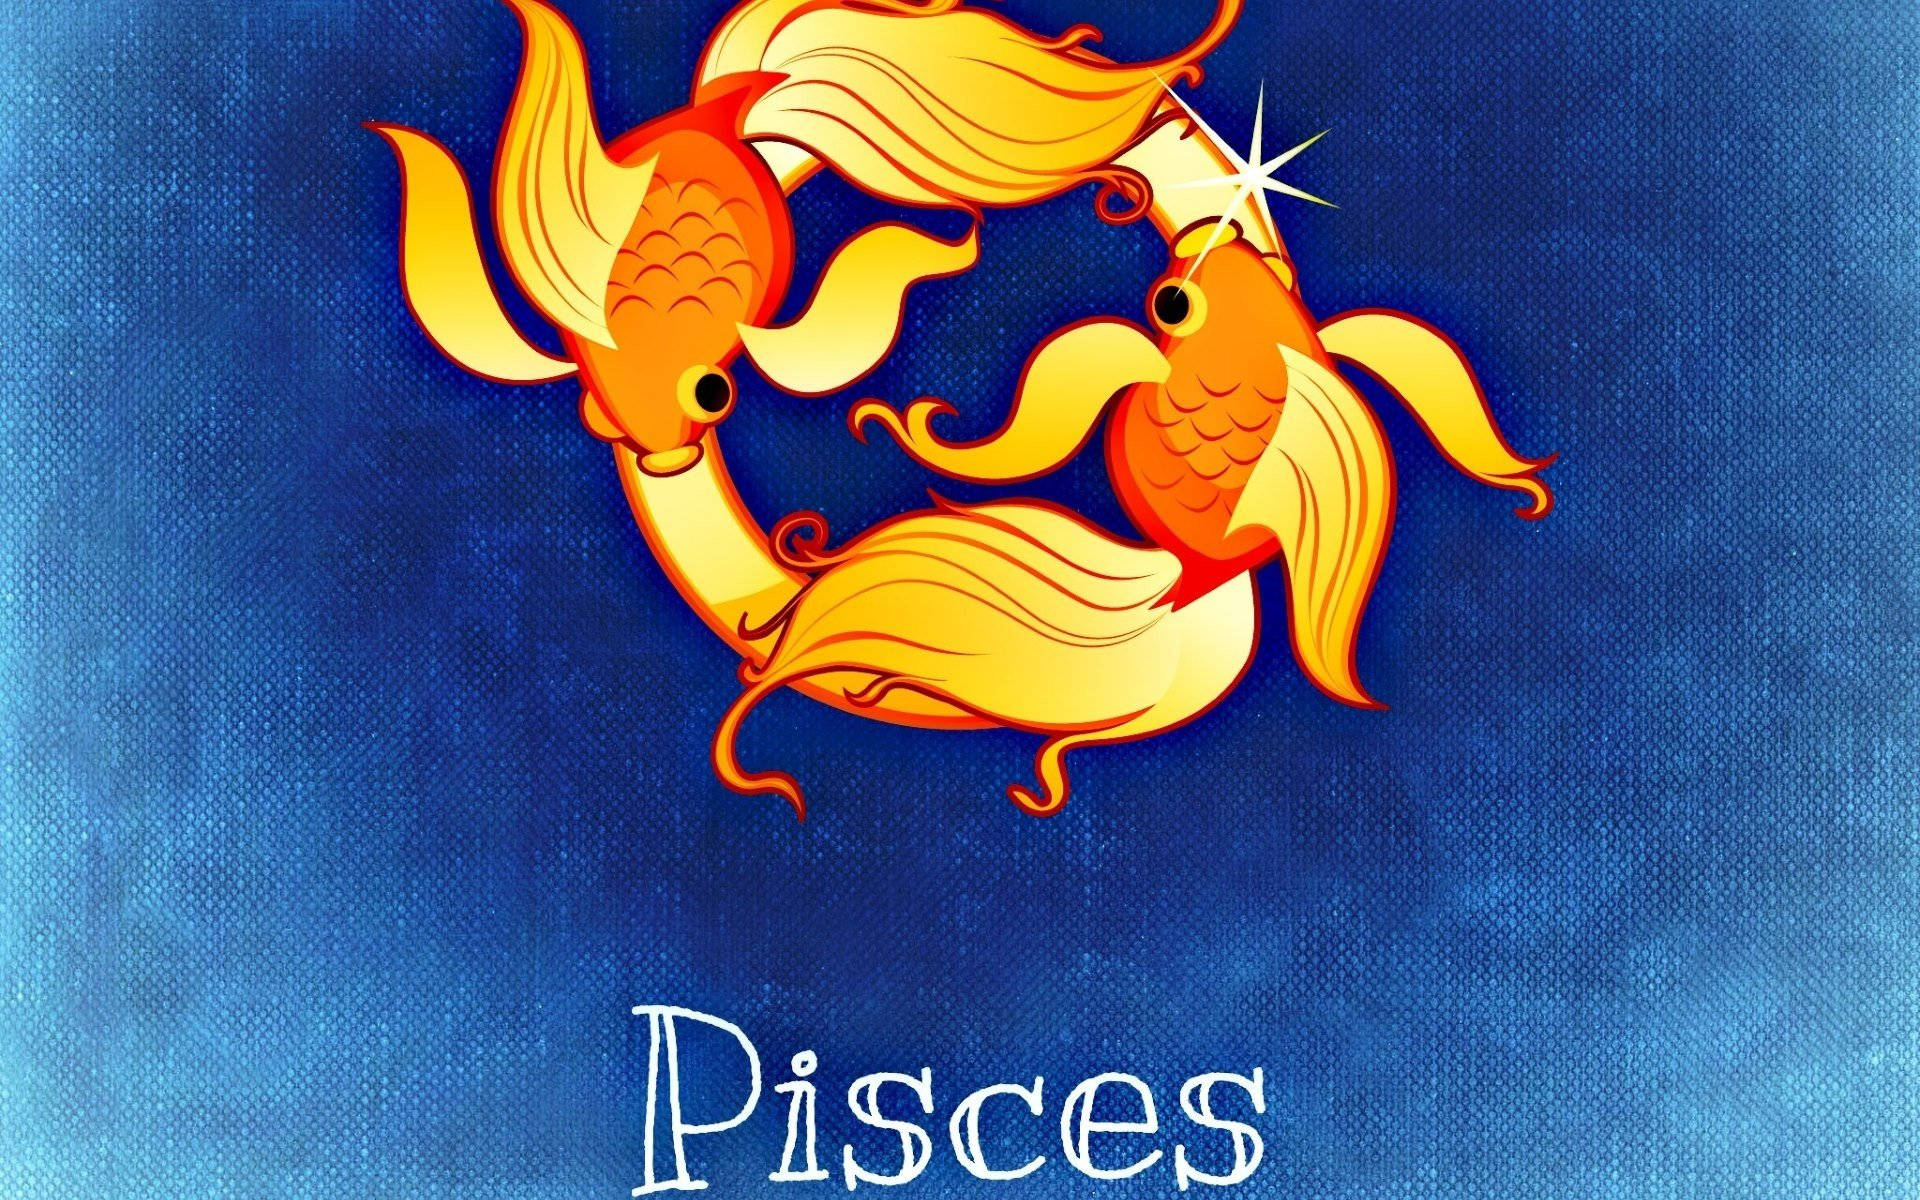 Free Pisces Wallpaper Downloads, [100+] Pisces Wallpapers for FREE |  